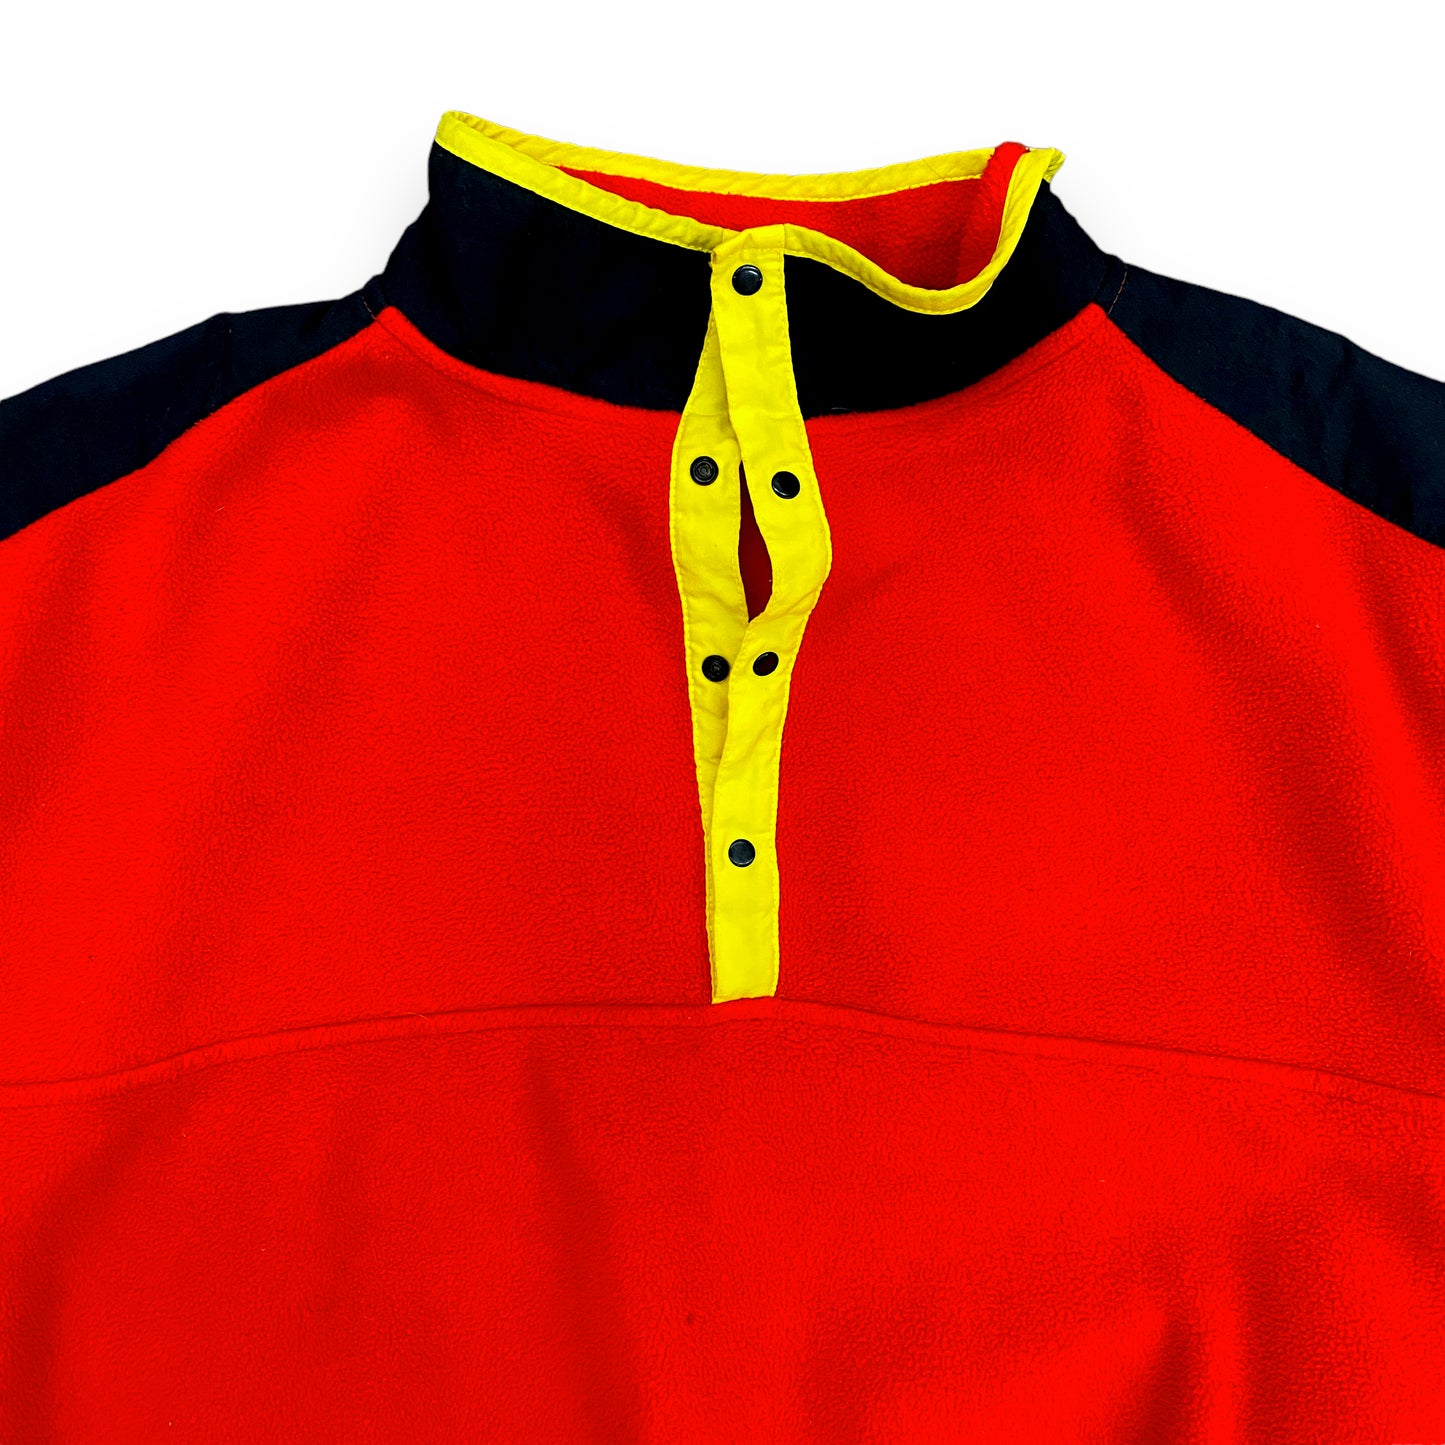 1990s Red & Black Fleece Snap Pull Over - Size Large